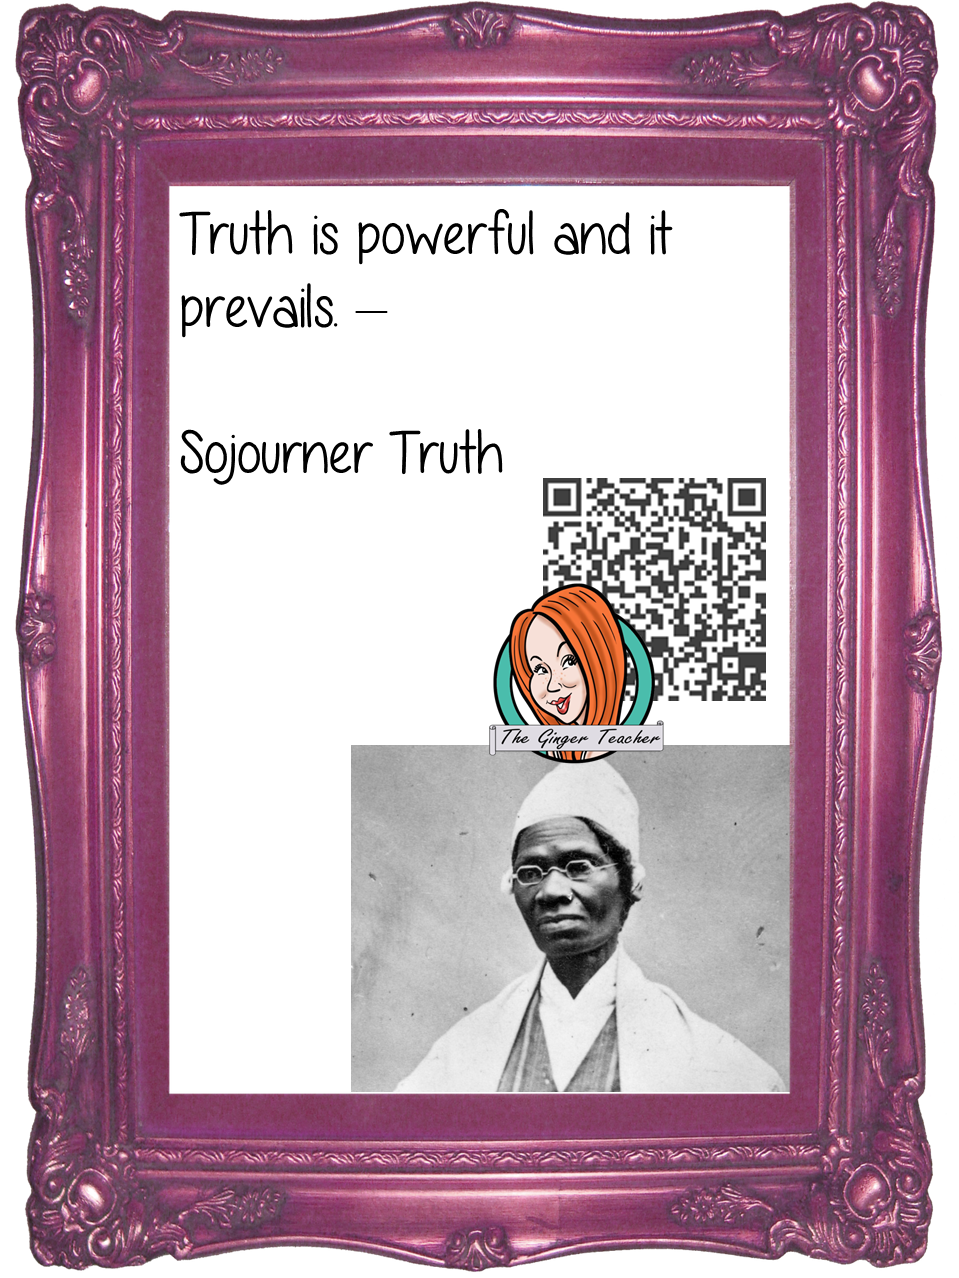 Sojourner Truth Interactive Quote Poster Augmented Reality (AR) interactive quote poster This poster can be used in your classroom access the augmented reality aspects of this poster download the free Metaverse AR (augmented reality) app. Sojourner Truth will appear in your classroom to give your kids extra facts and a chance to hear her speech. Included are two posters one color and one black and white with AR codes for interactive content #blackhistorymonth #blackhistory #sojournertruth